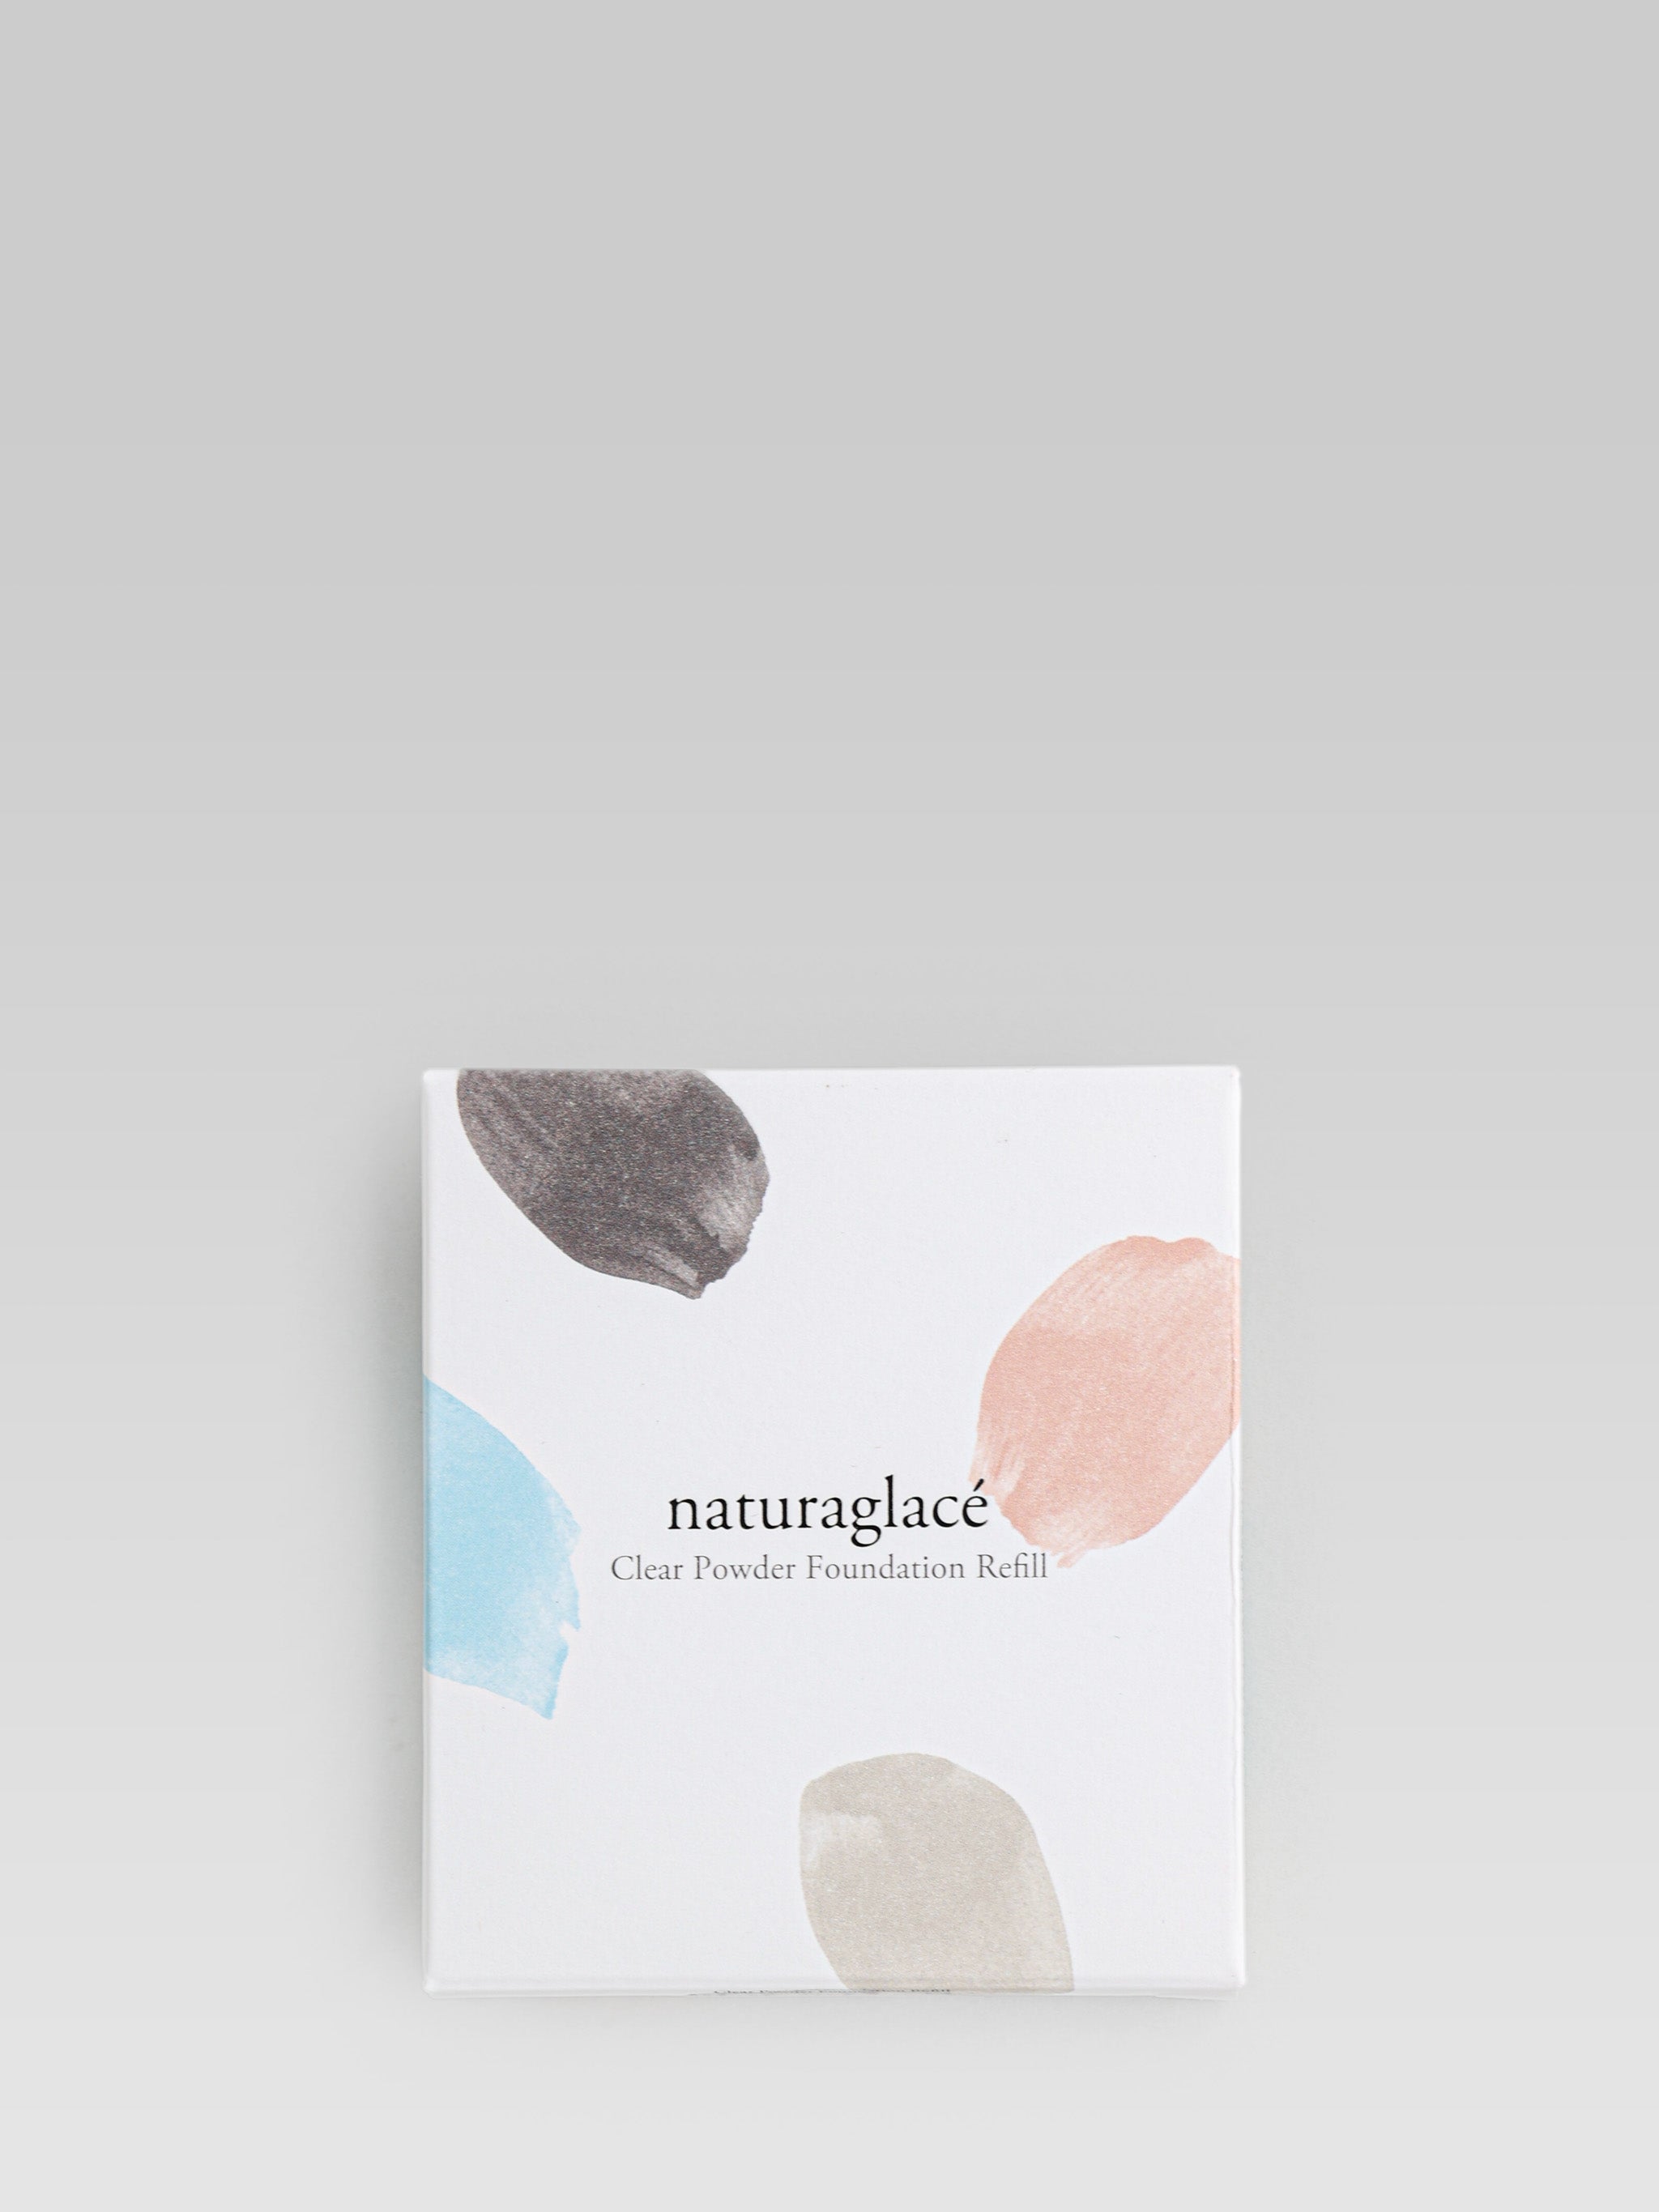 Naturaglace Clear Powder Foundation Refill product packaging 